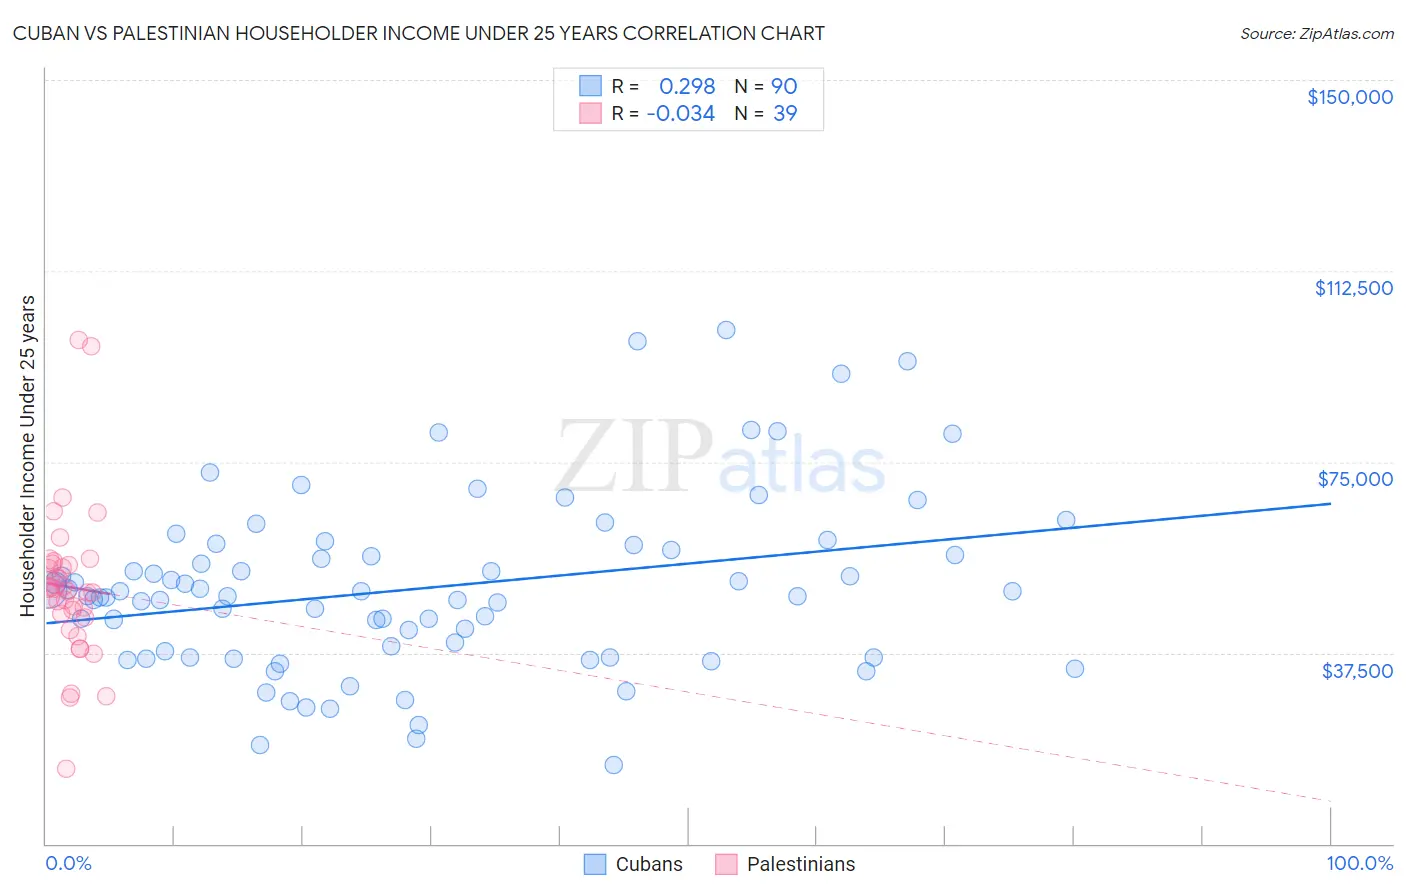 Cuban vs Palestinian Householder Income Under 25 years